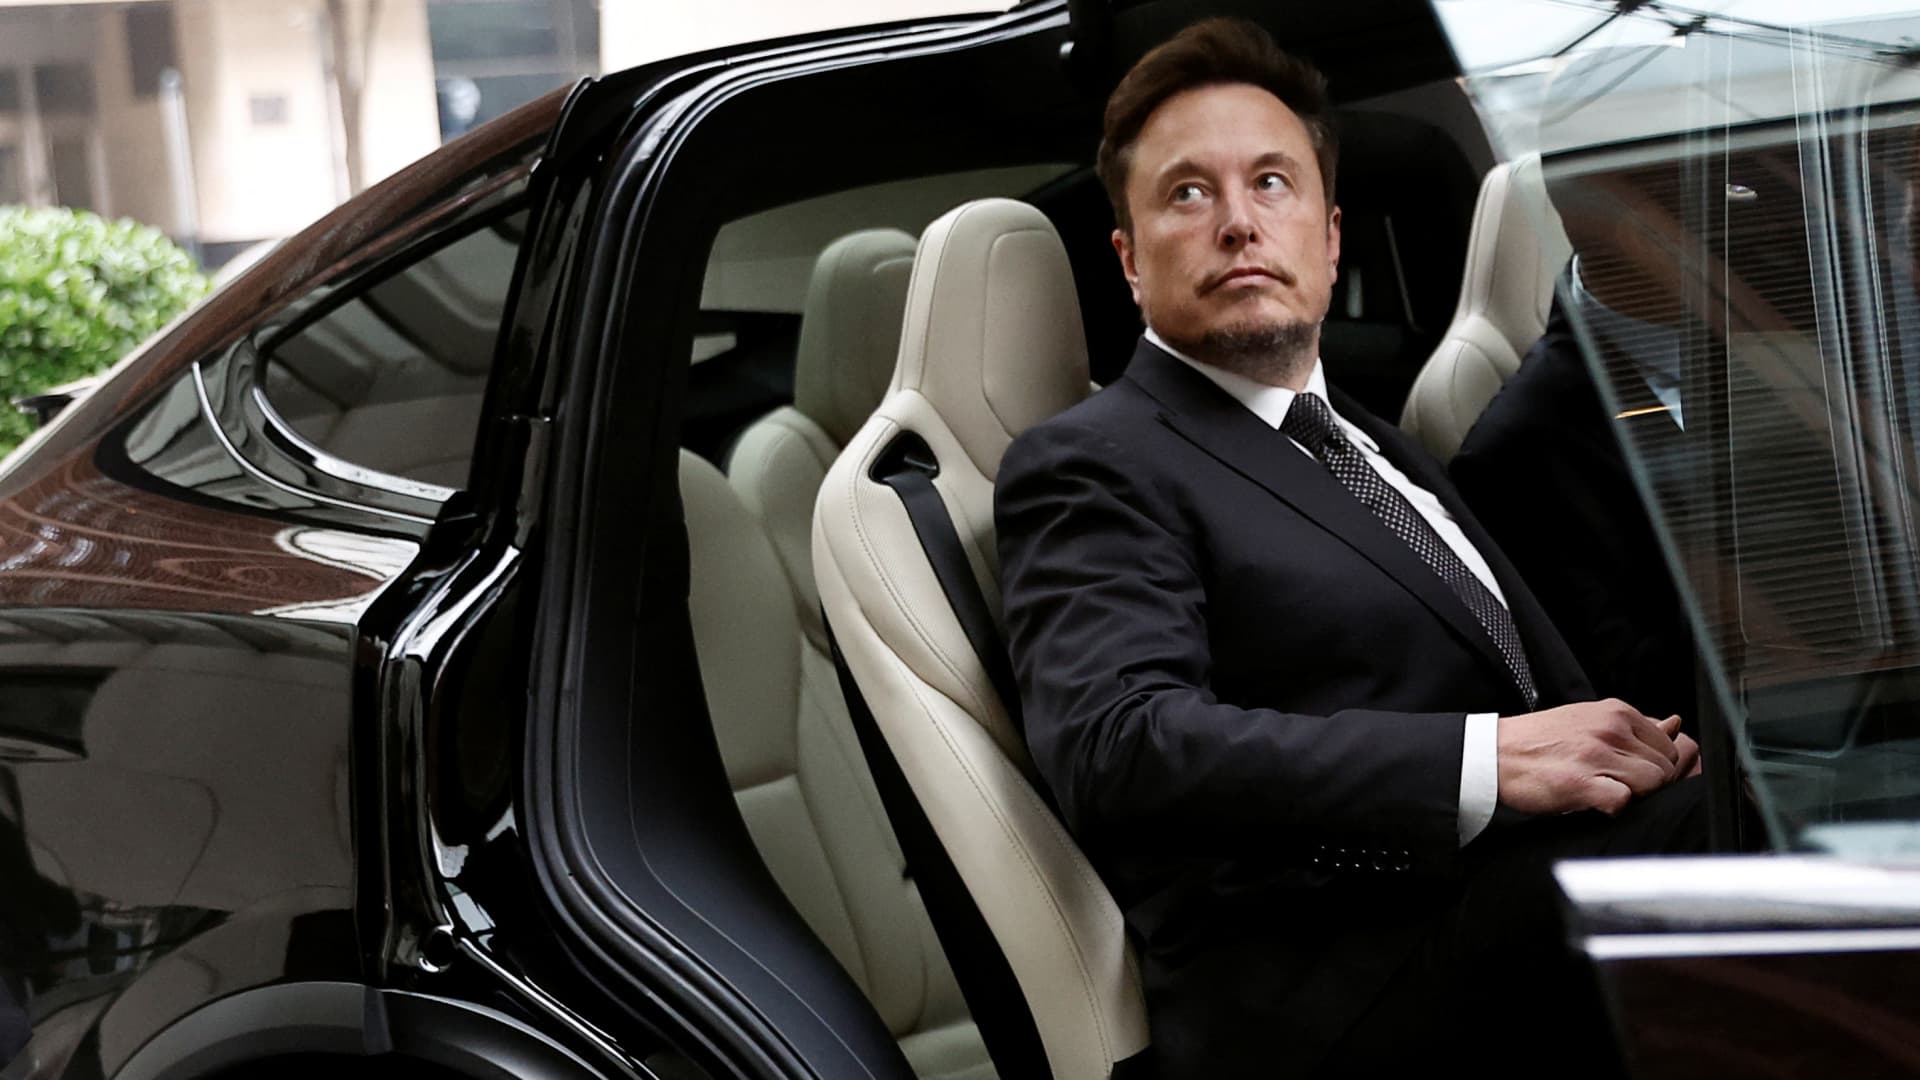 Tesla Chief Executive Officer Elon Musk gets in a Tesla car as he leaves a hotel in Beijing, China May 31, 2023.